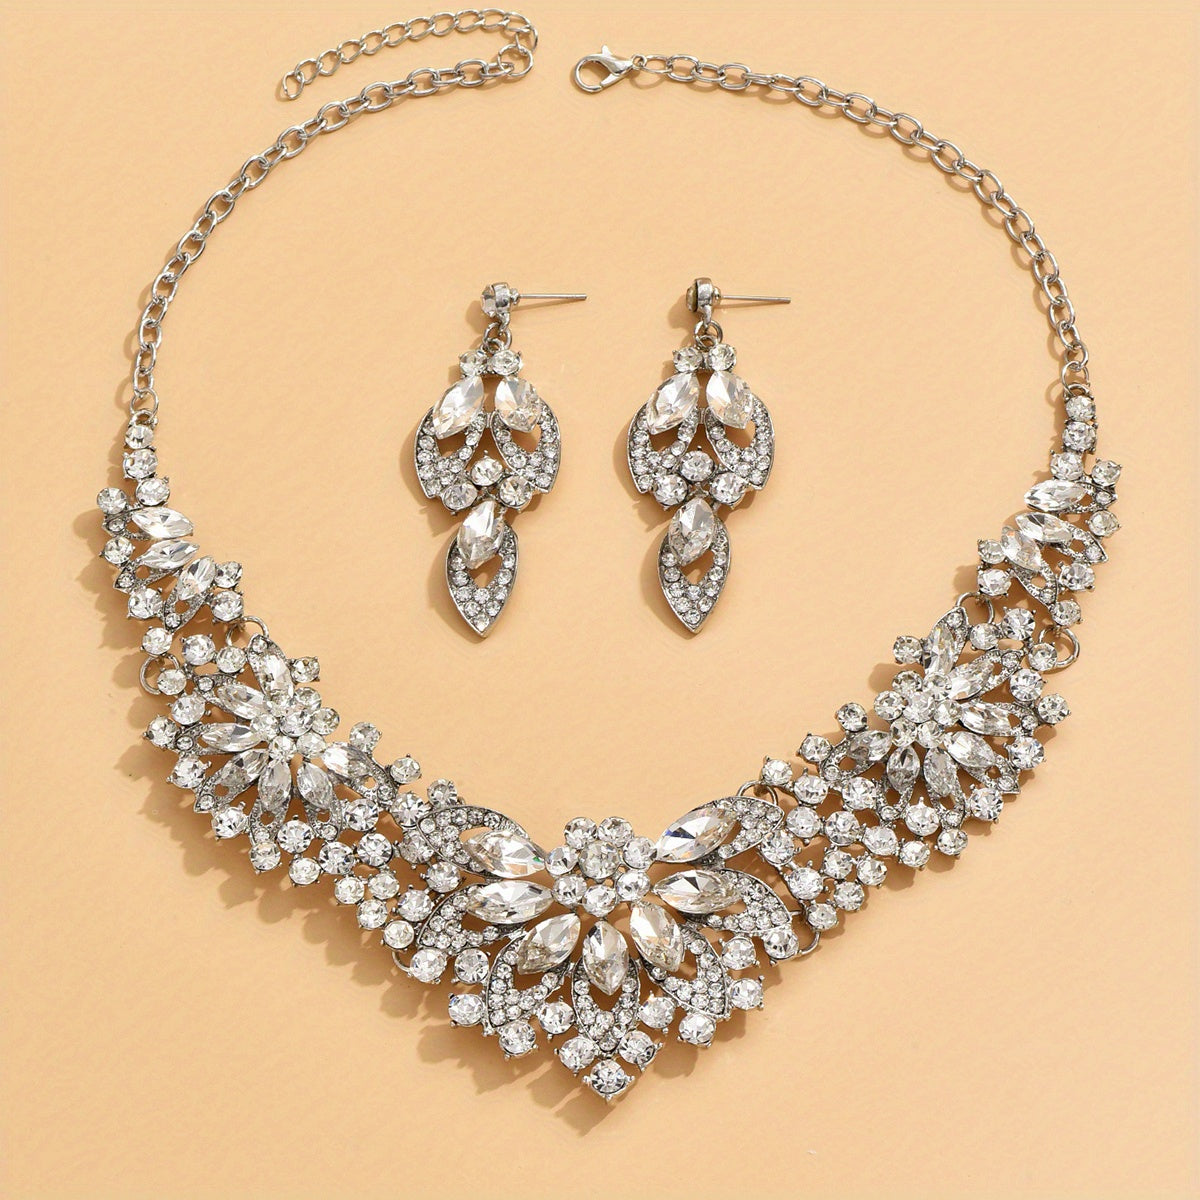 Elegant Crystal Jewelry Set for Weddings and Special Occasions - Chunky Pendant Necklace and Dangle Earrings with Sparkling Crystals